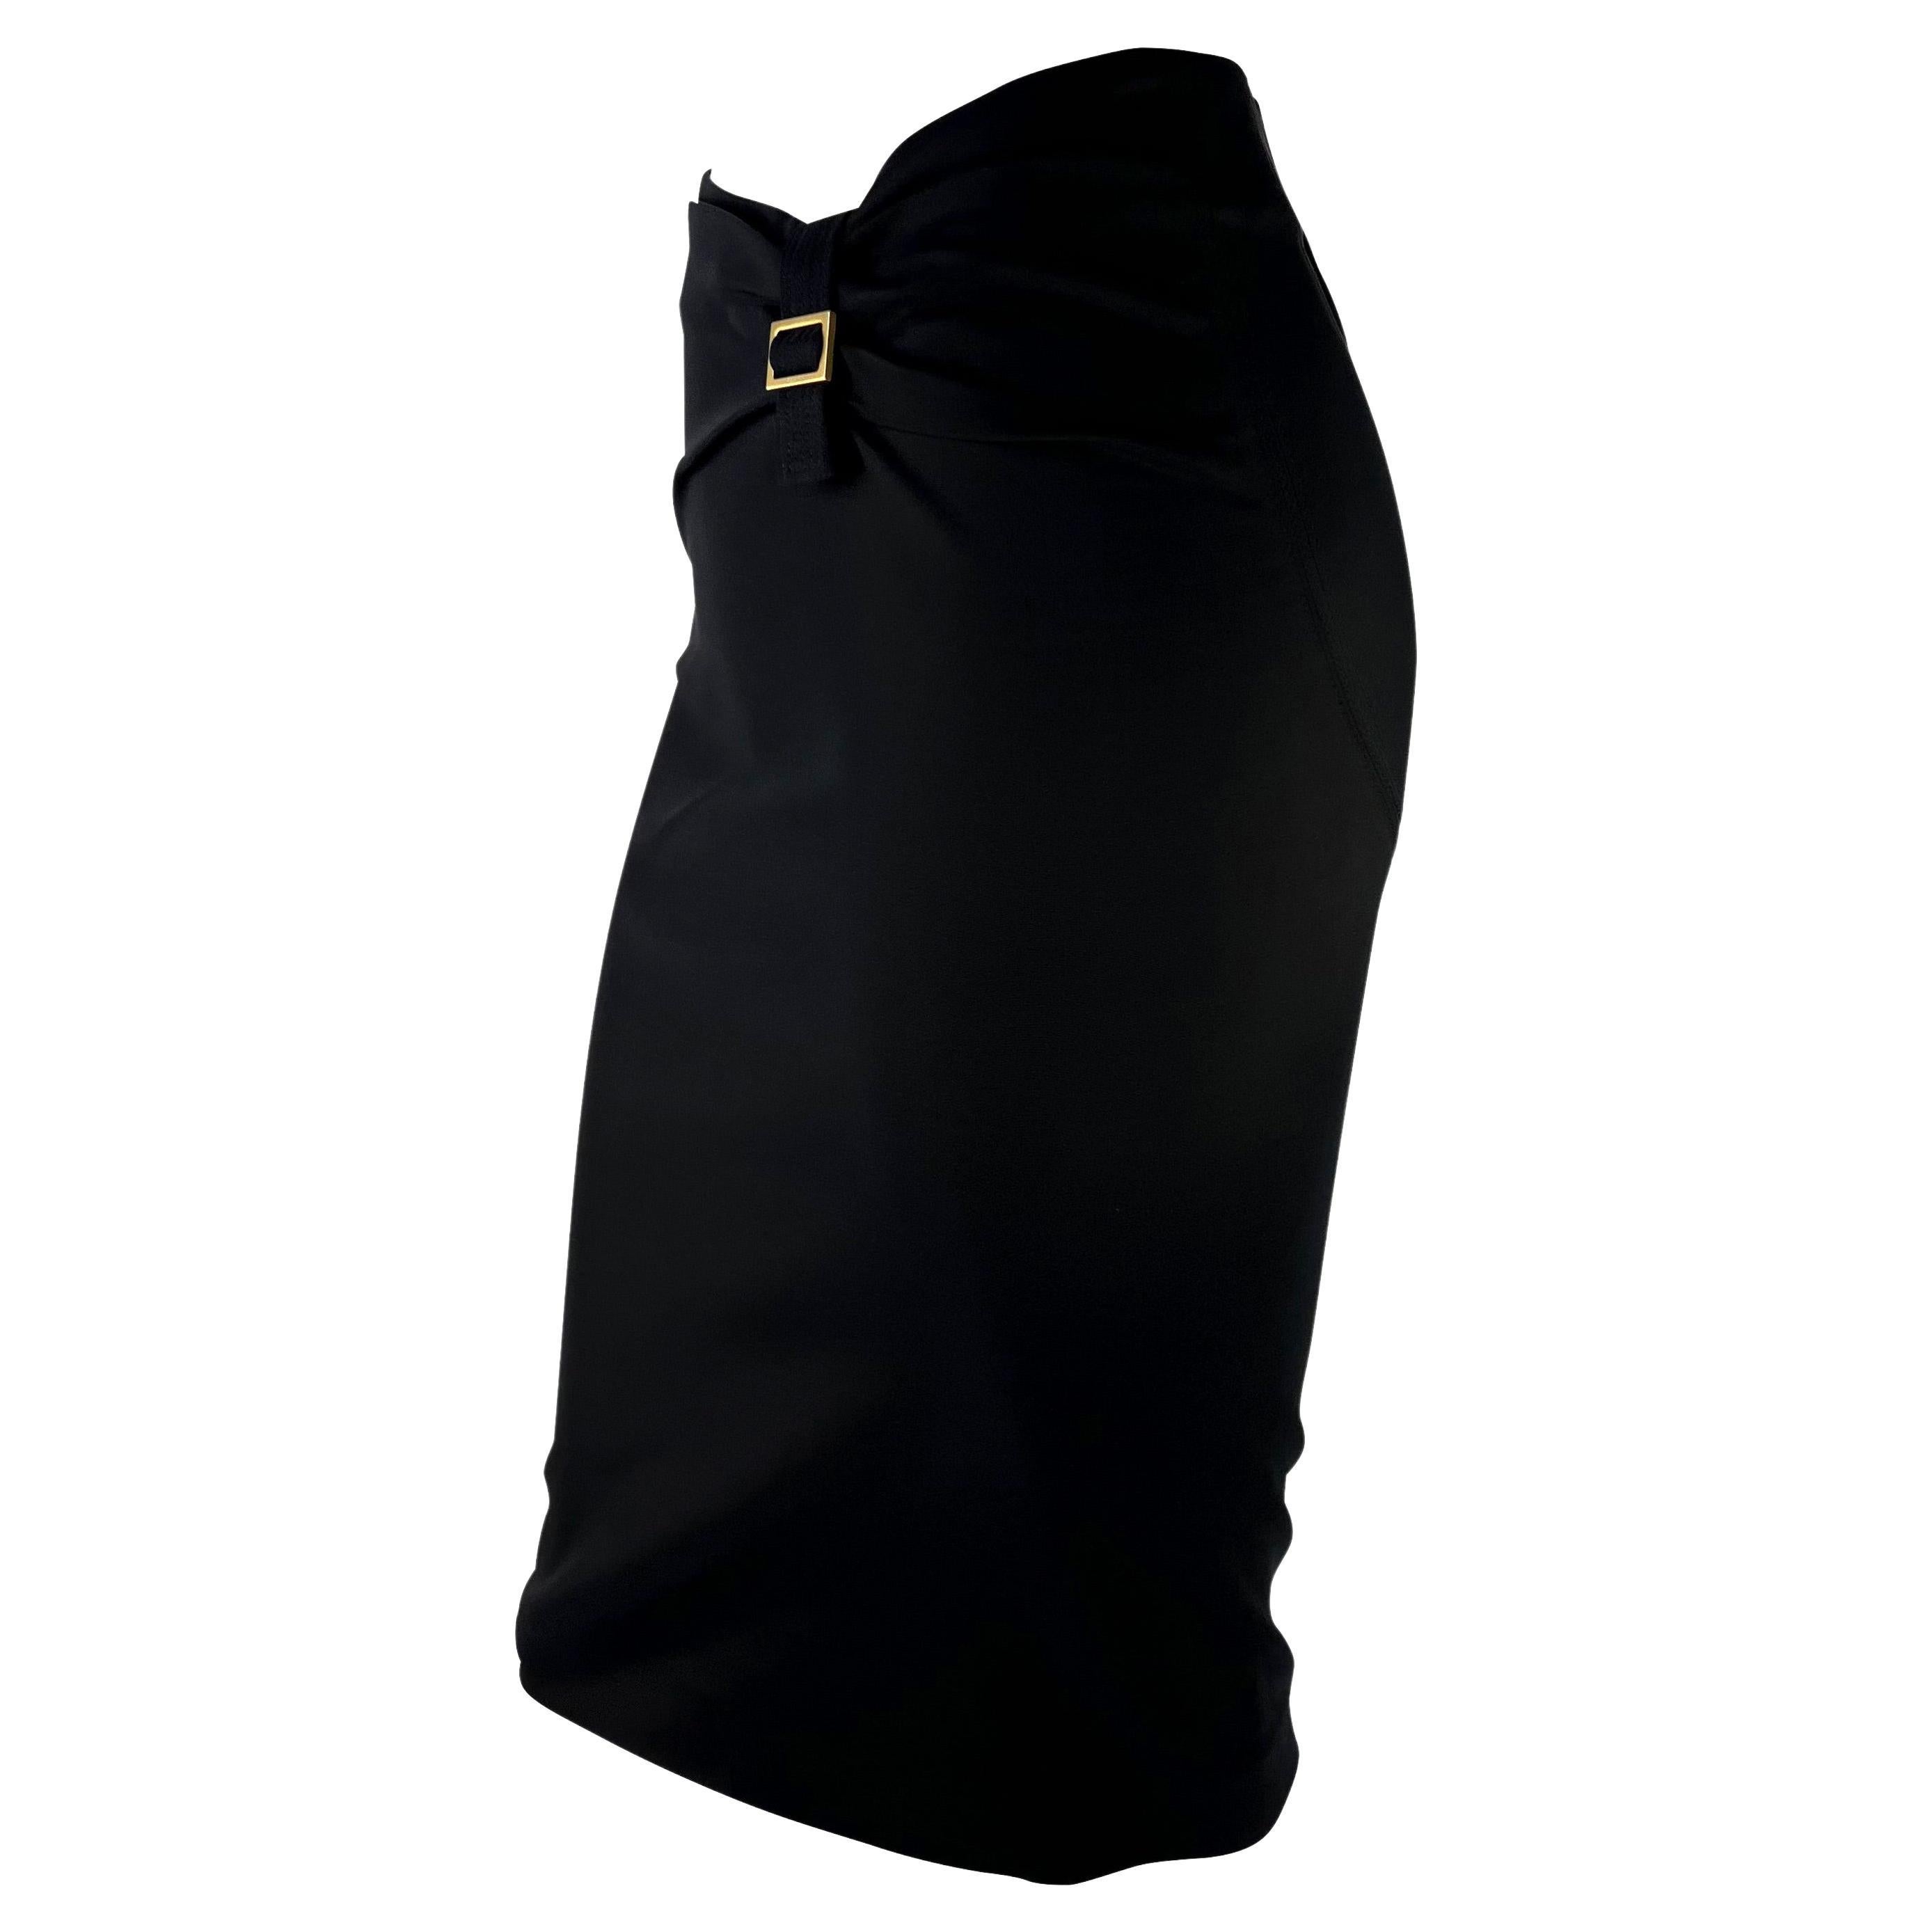 TheRealList presents: a black bodycon Gucci skirt, designed by Tom Ford. From the Fall/Winter 2003 collection, this form-fitting skirt features panels that tactfully enhance the female form. The skirt is made complete with a square gold buckle at